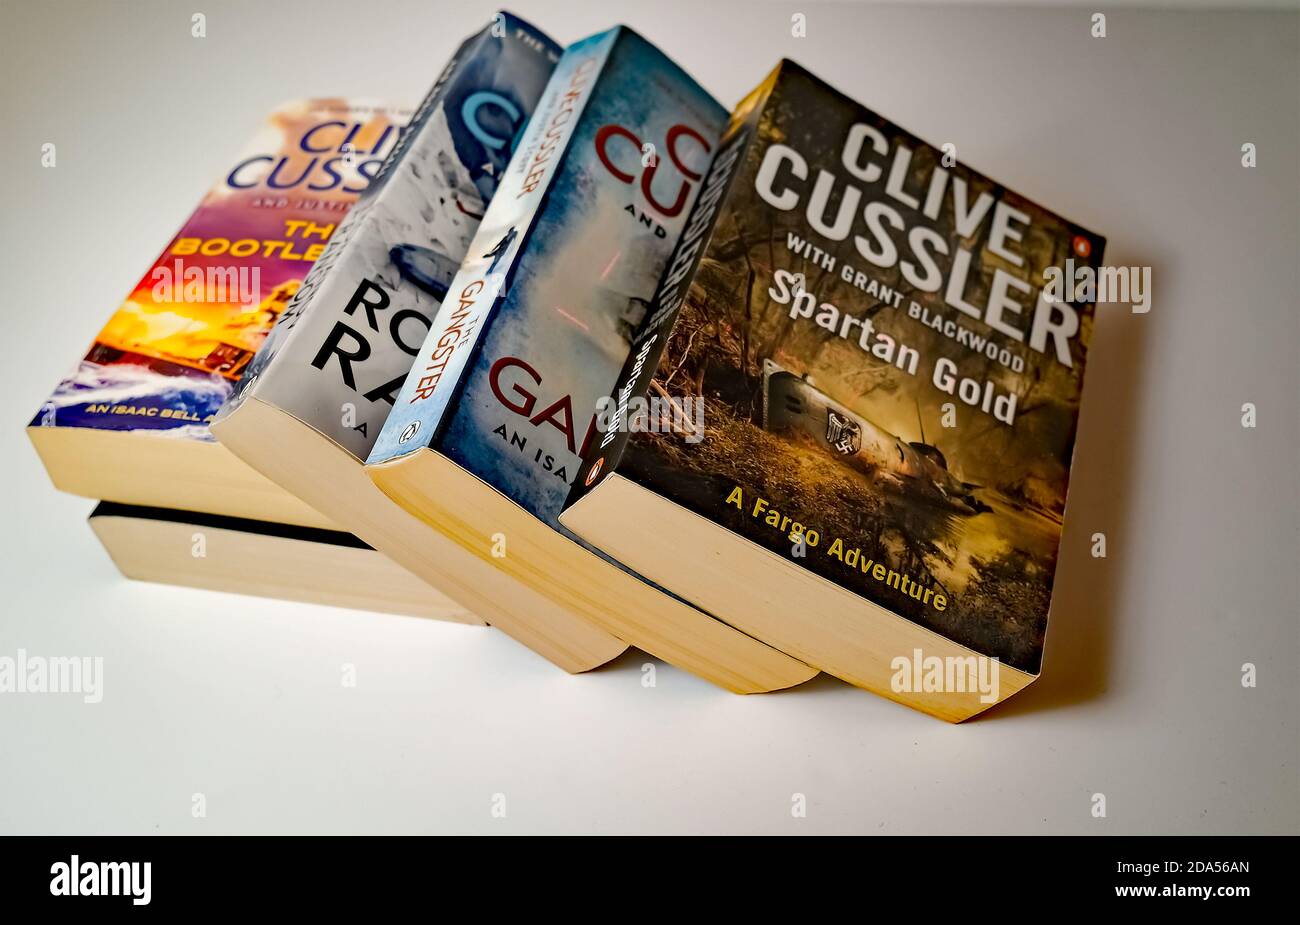 Norwich, Norfolk, UK – November 08 2020. Illustrative editorial photo of a selection of thriller genre paperback books written by Clive Cussler isolat Stock Photo